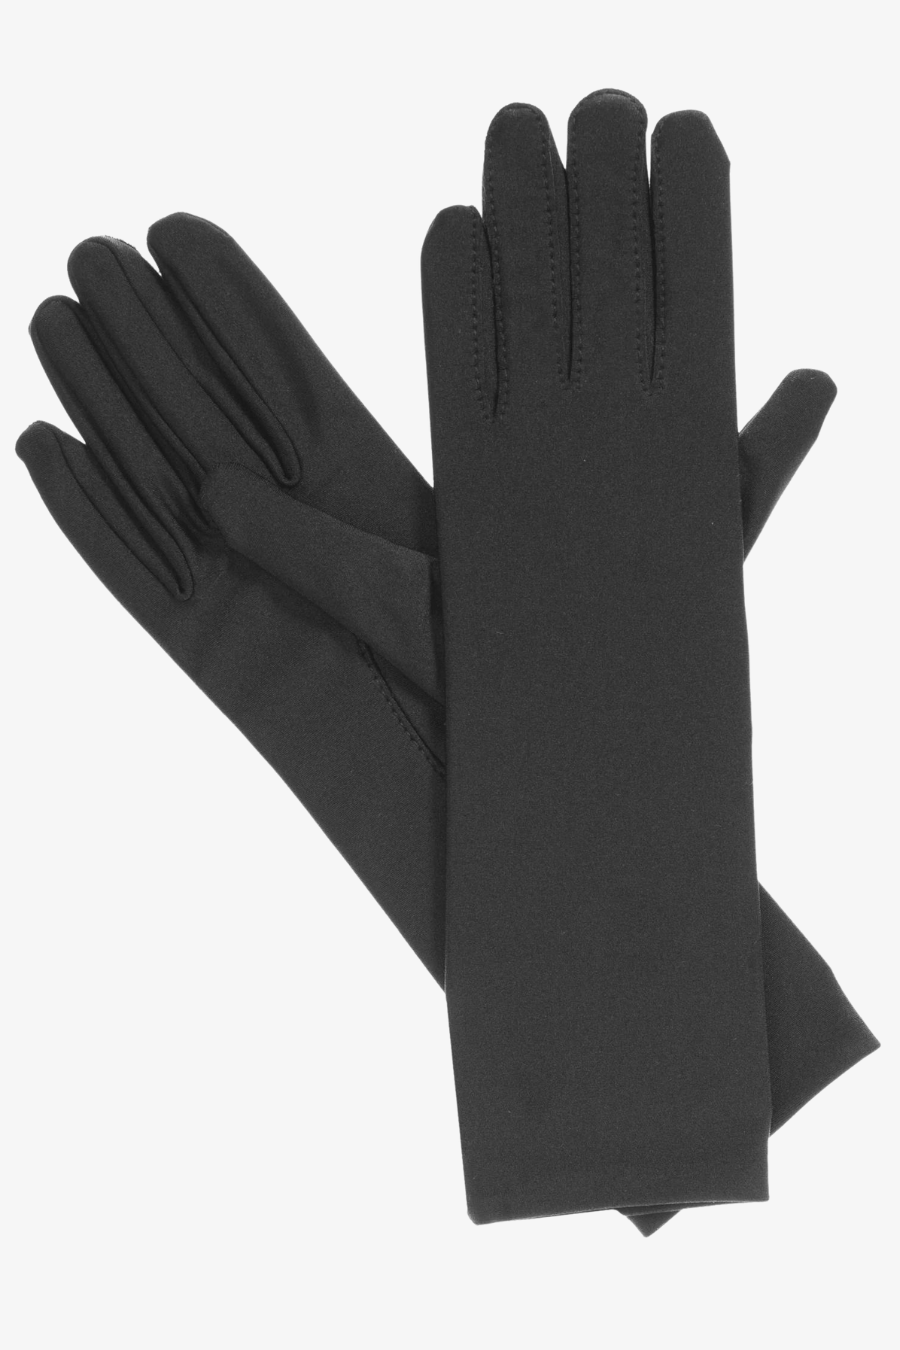 Isotoner Women’s Classic Stretch Slim 3-Button Gloves - Unlined